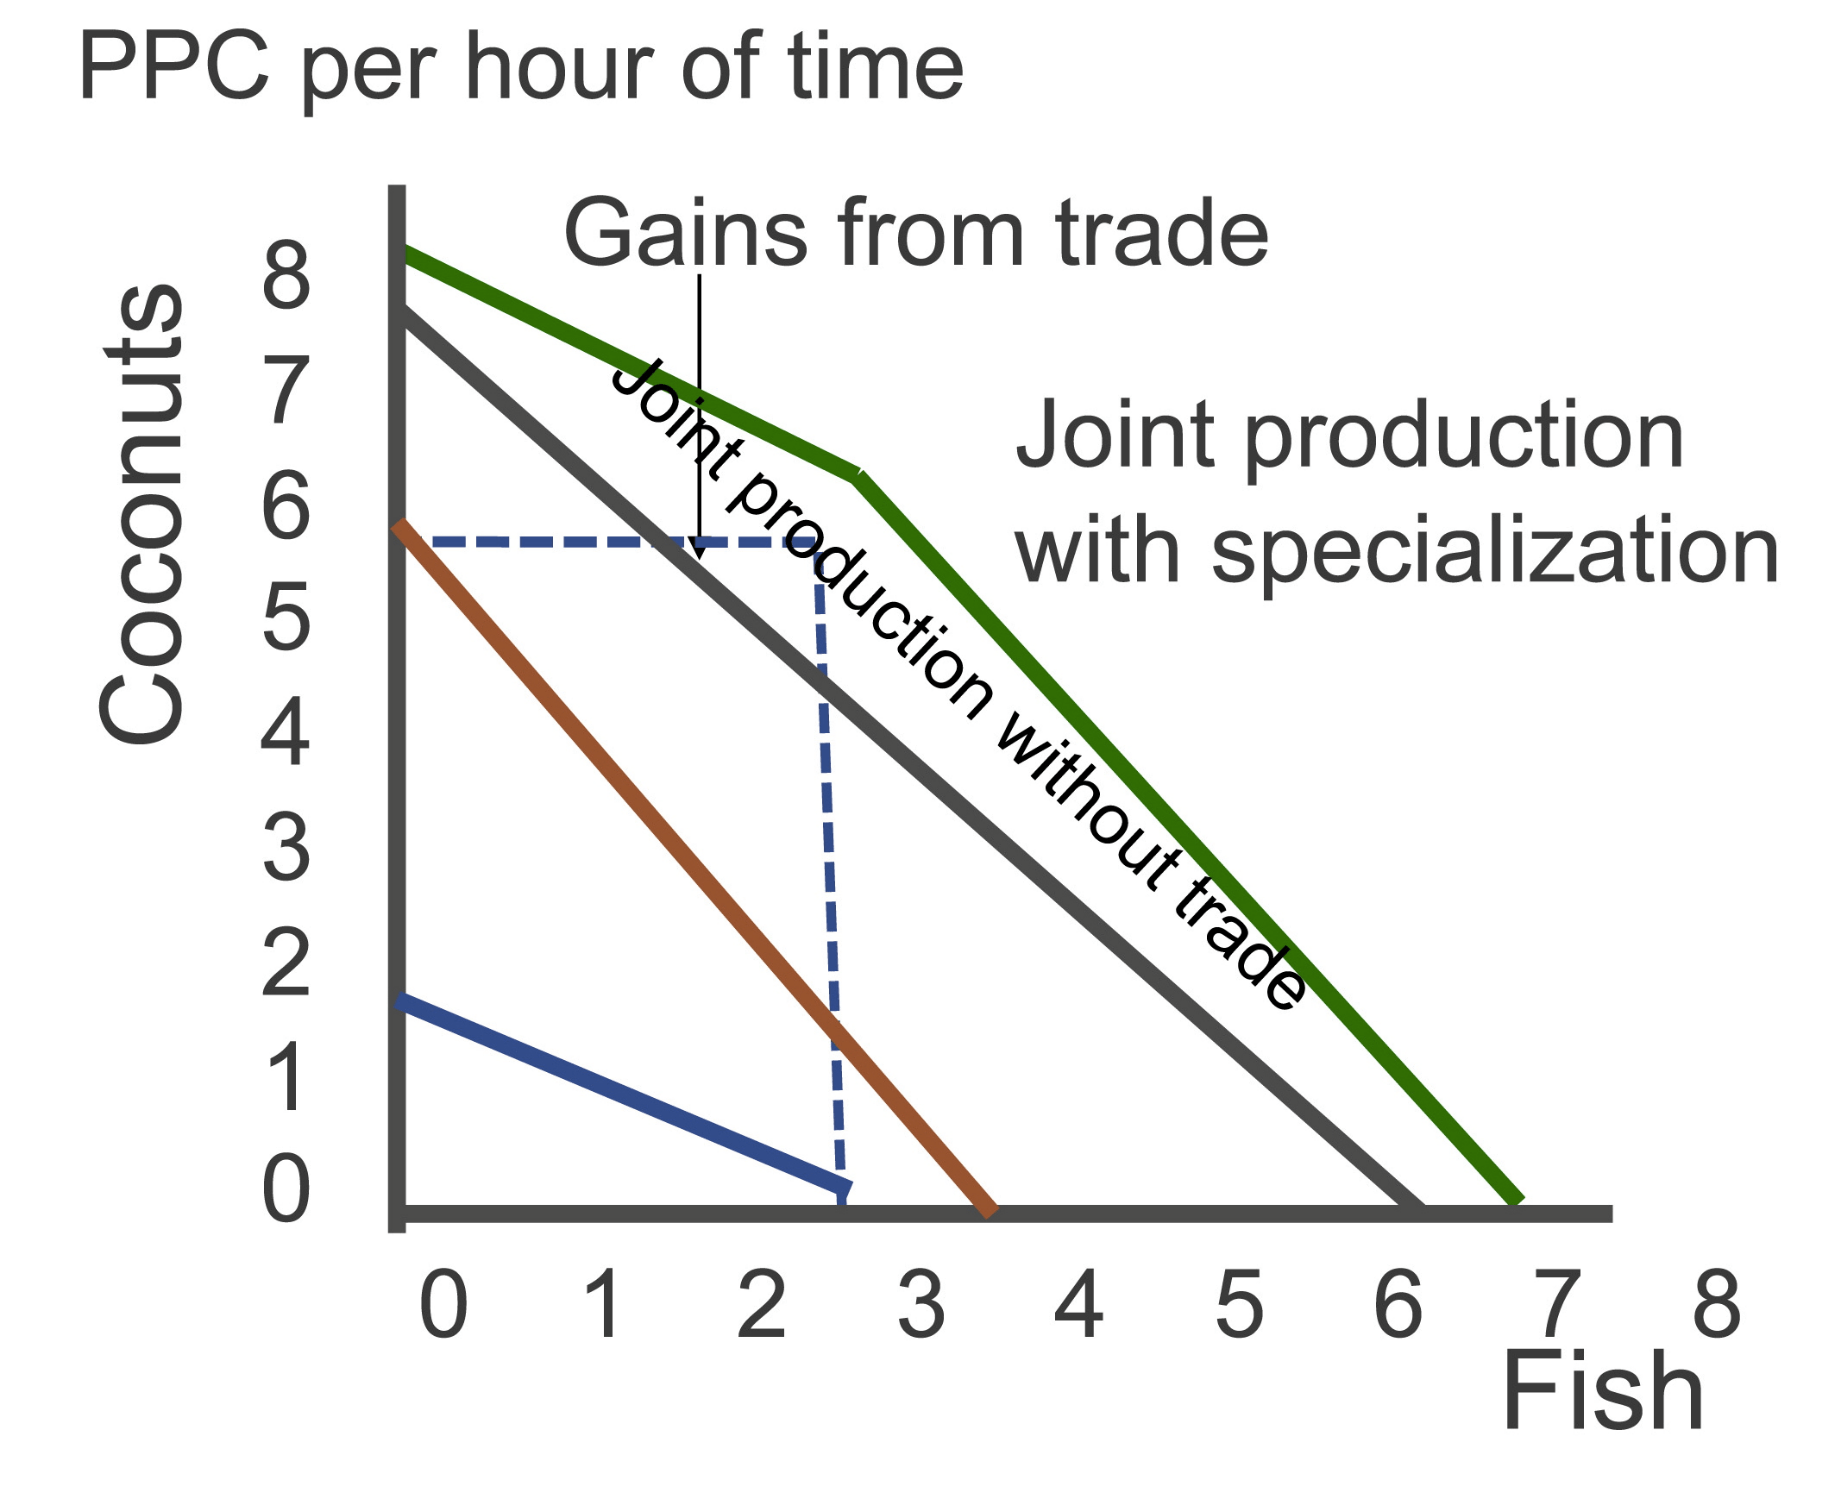 PPC per hour of time Gains from trade 1 -ego 2 Joint production
with specialization 3 4 5 6 Fish 